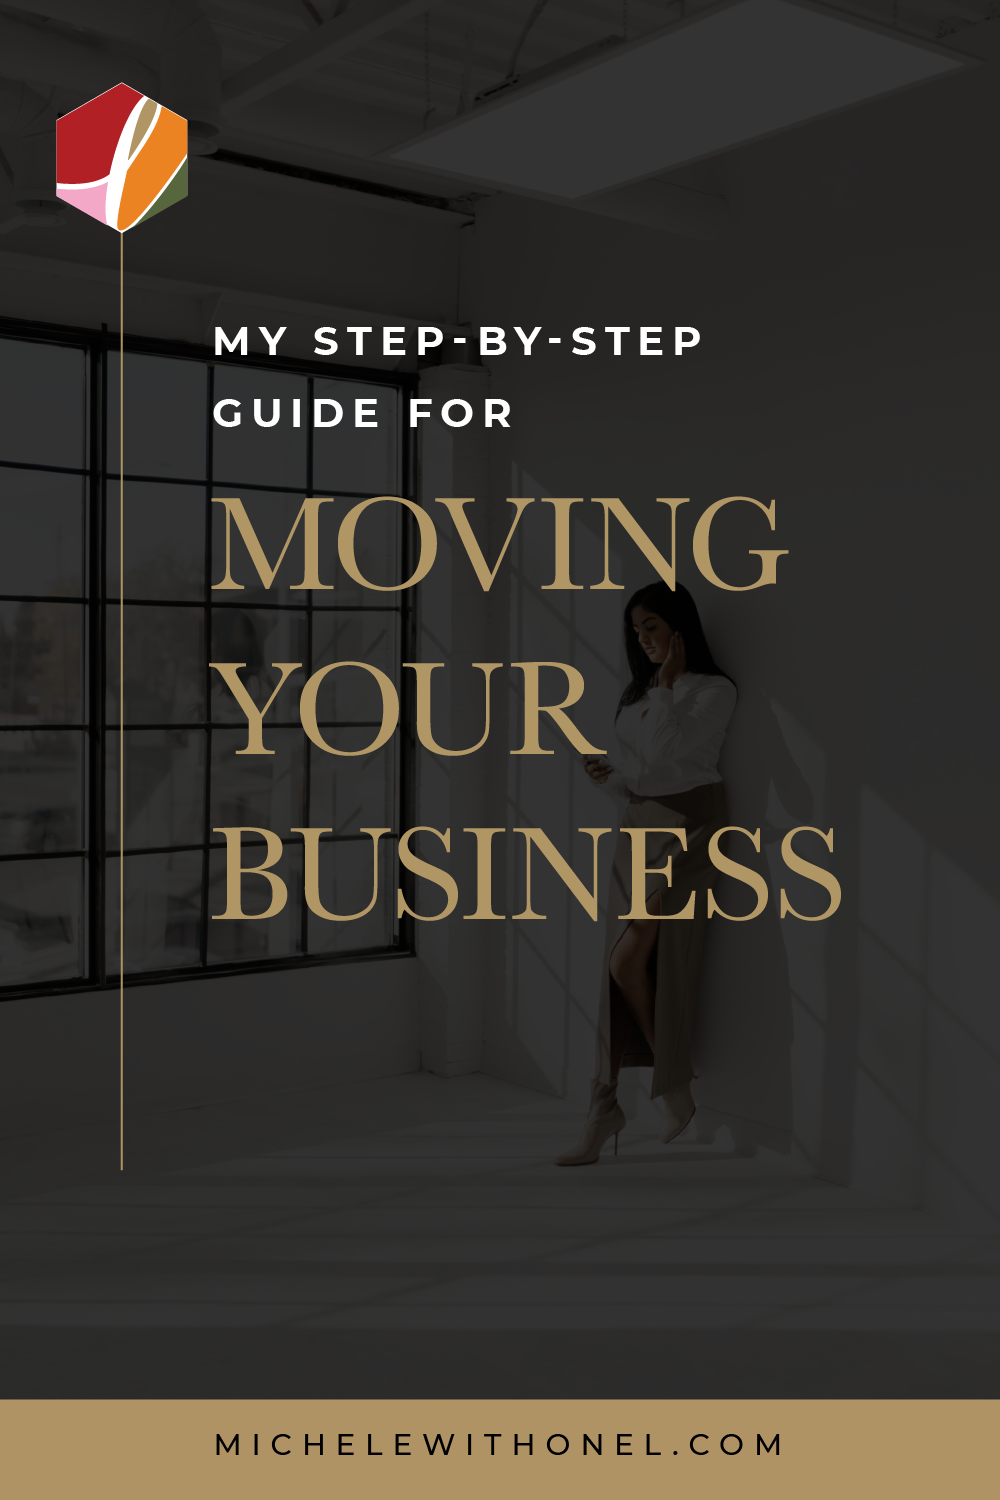 Are you relocating a business (or planning on it and need to know how)? This post is for you! Learn what it takes to move your biz to a new state in my step-by-step guide—including business relocation advice and tips on how to relocate and reopen a business. #relocating #business #branding #moving